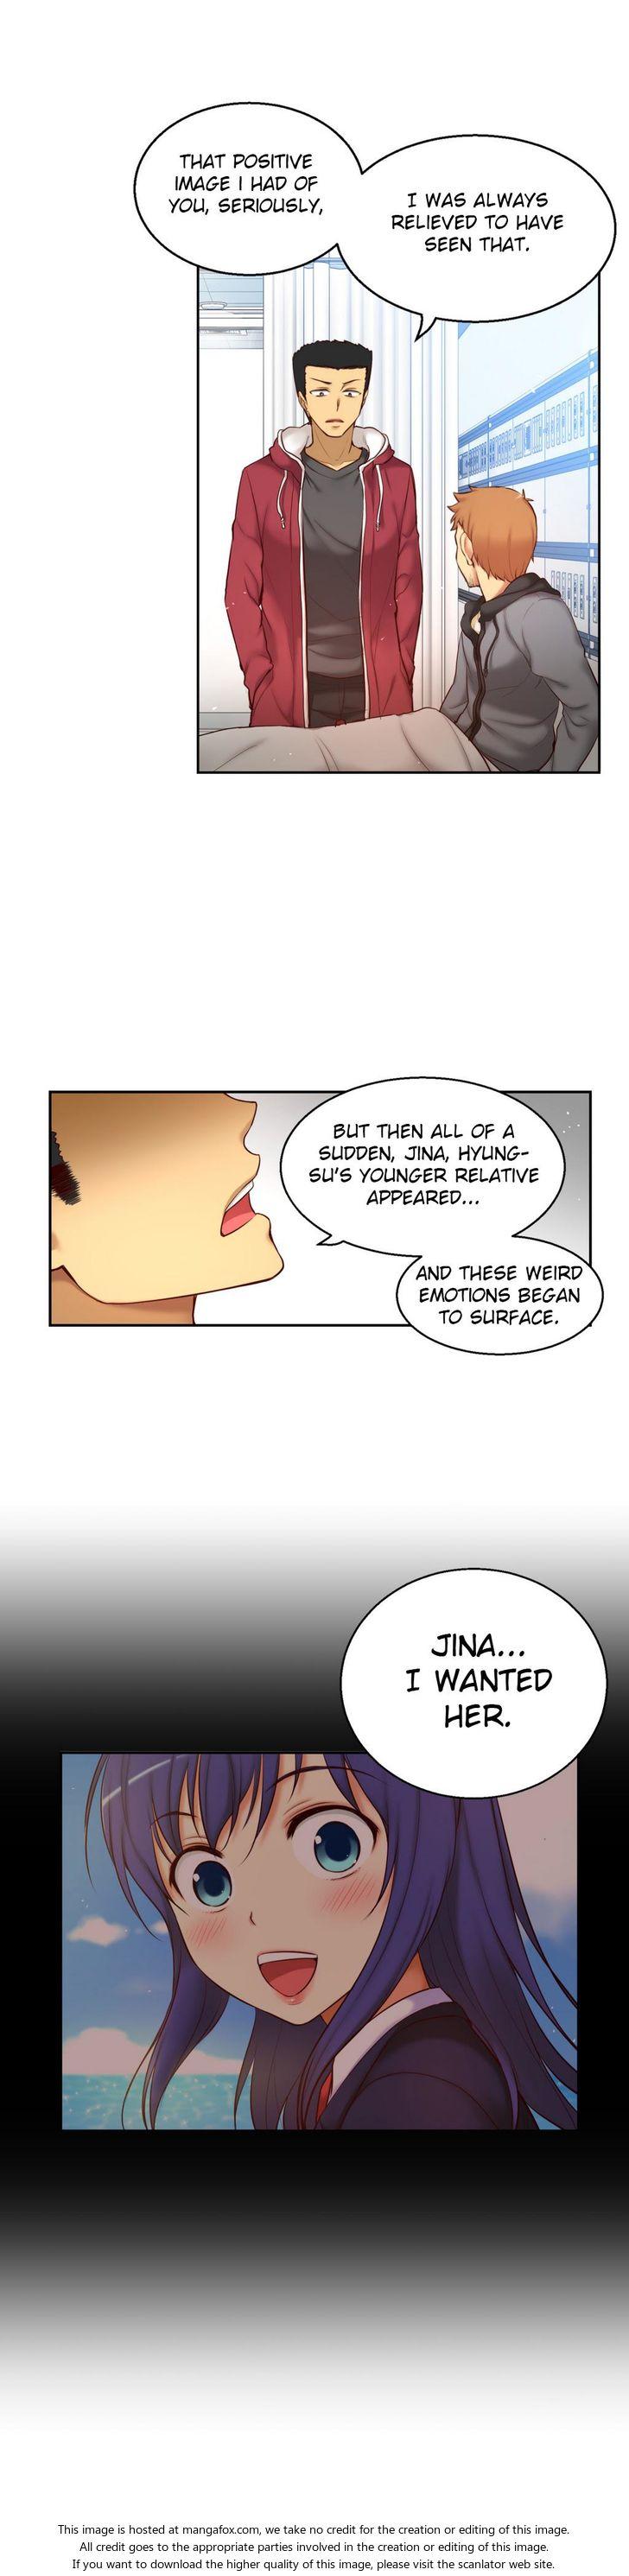 [Donggul Gom] She is Young (English) Part 1/2 1112